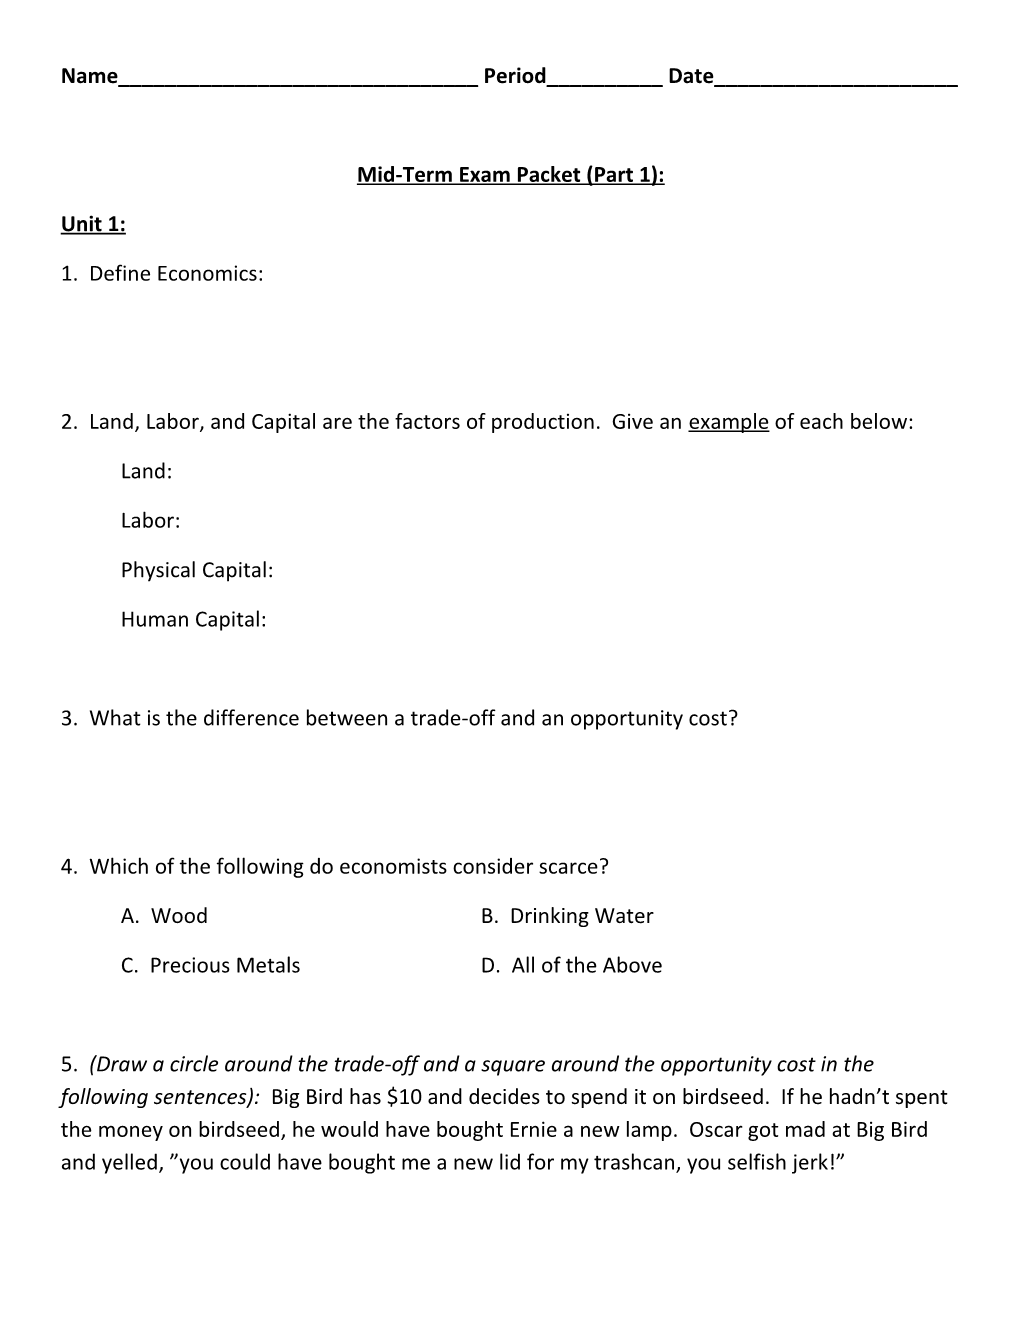 Mid-Term Exam Packet (Part 1)